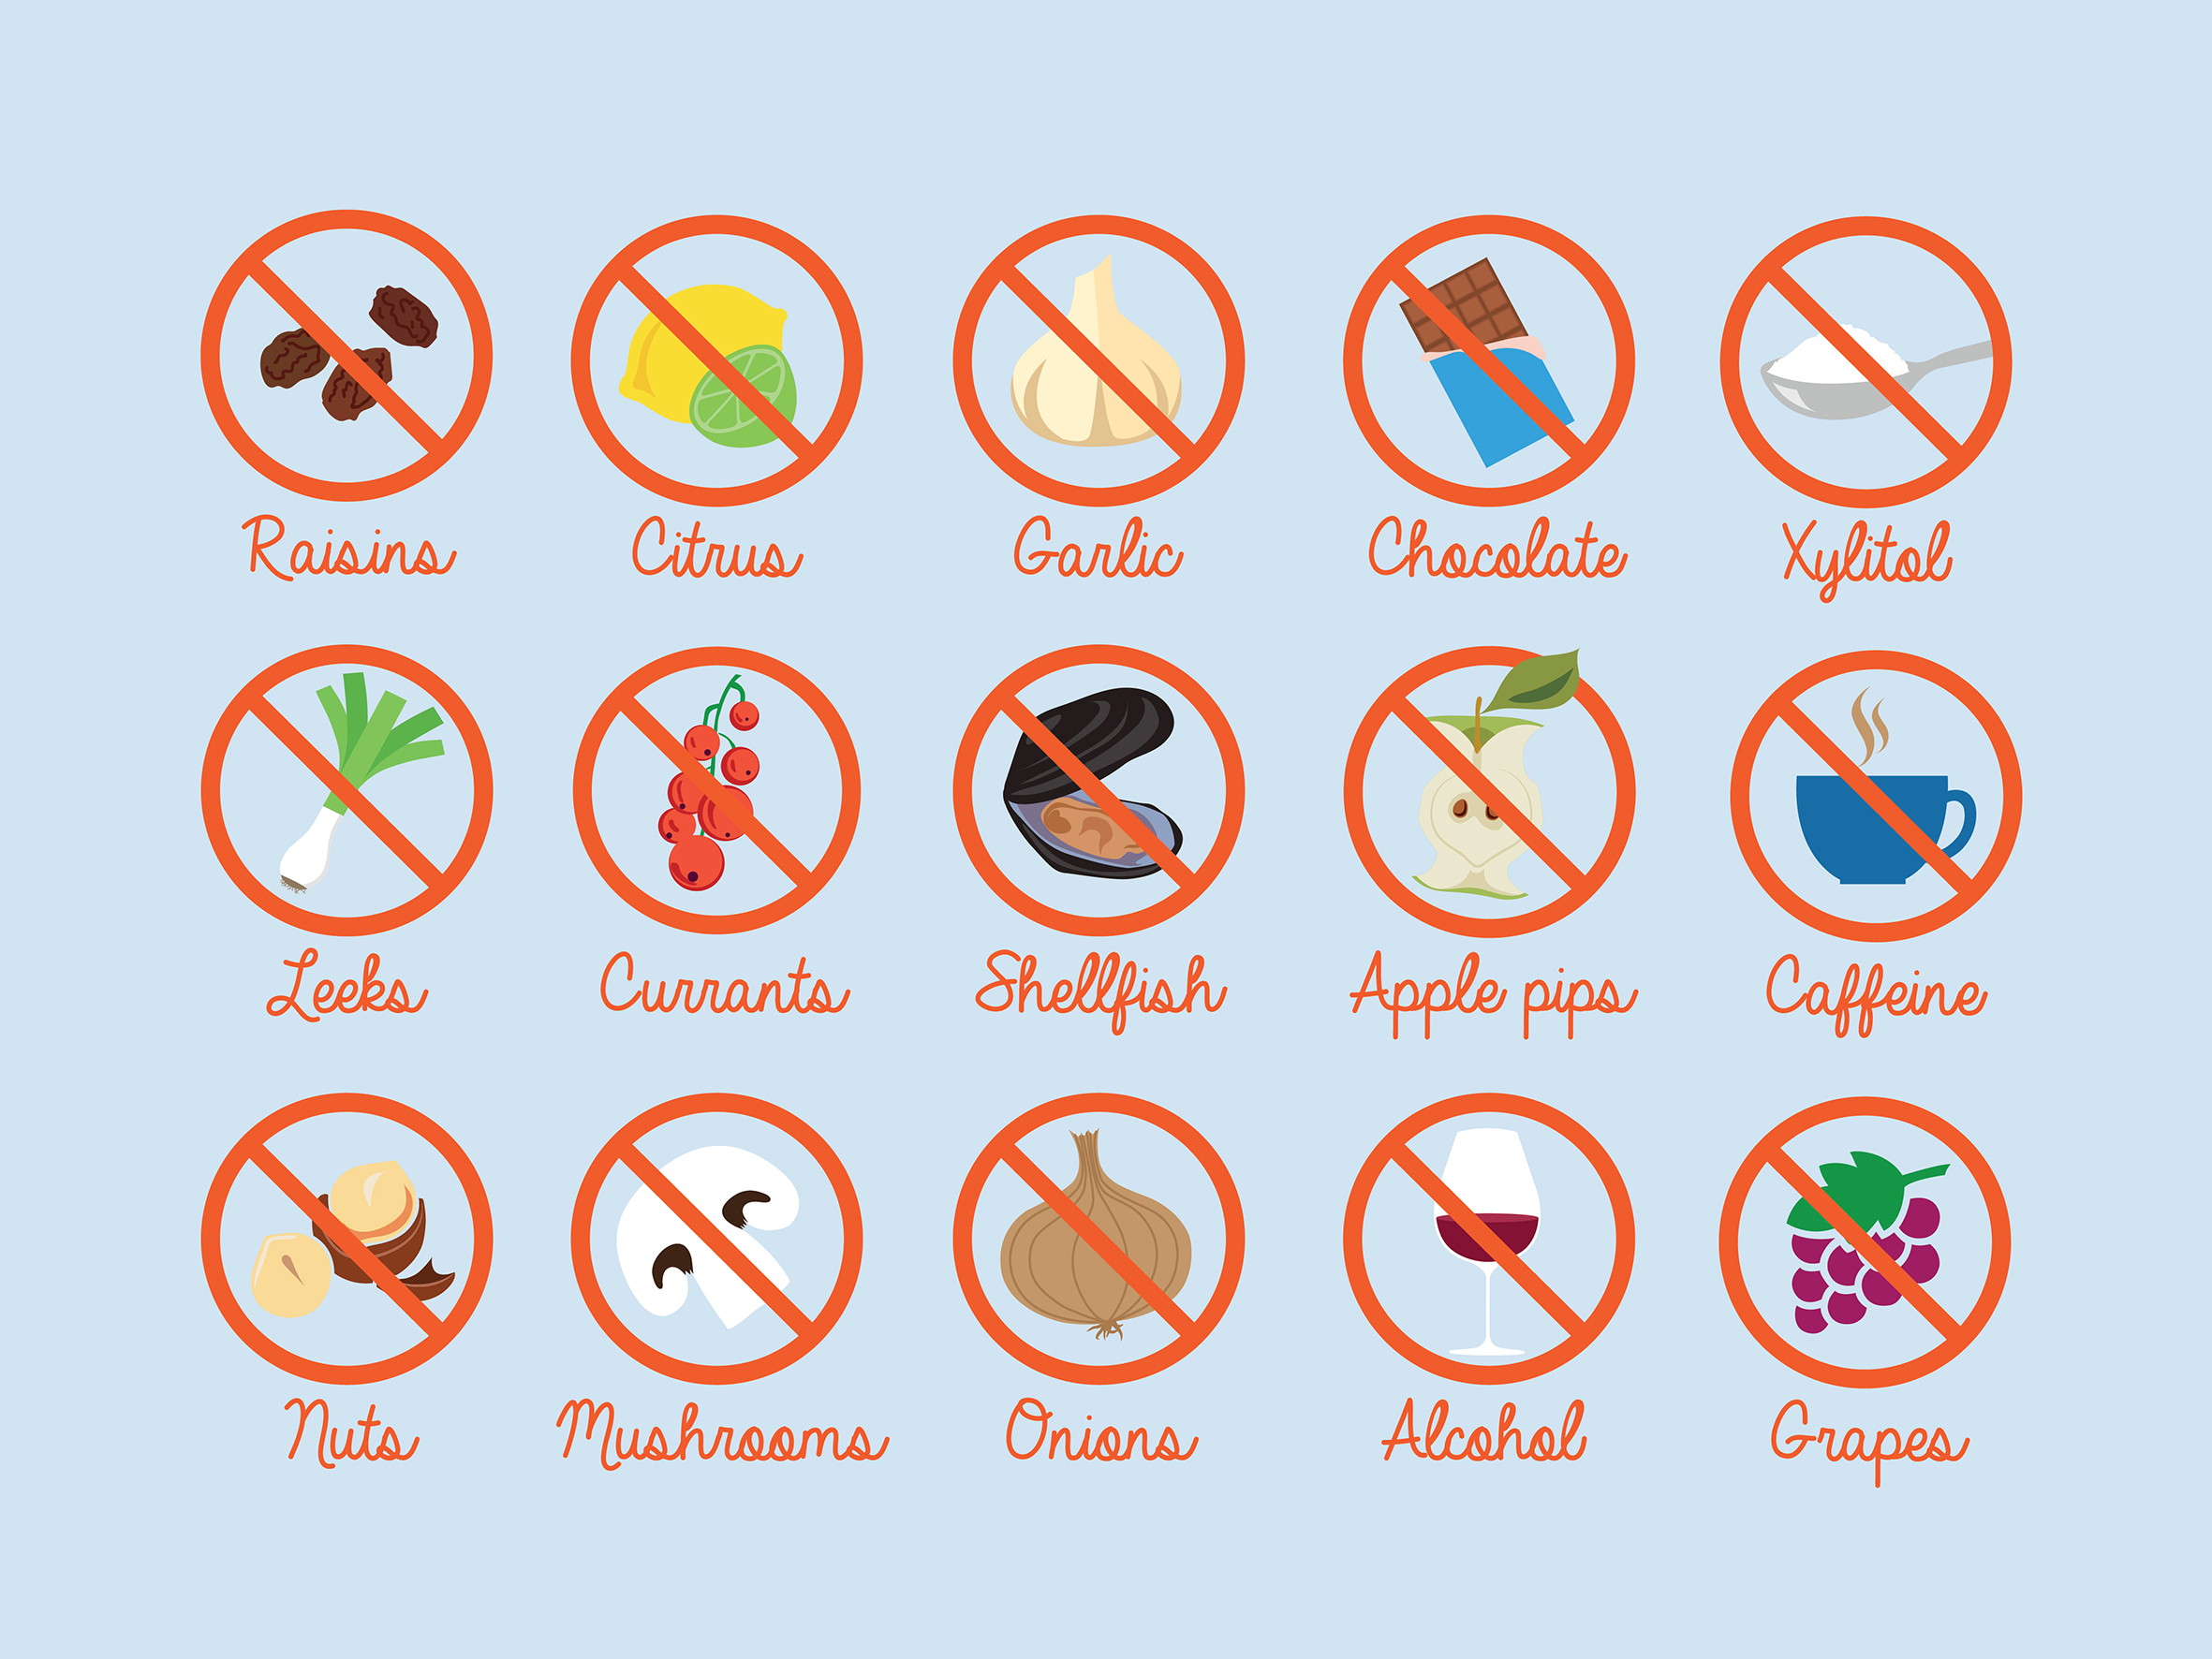 what foods are toxic to dogs